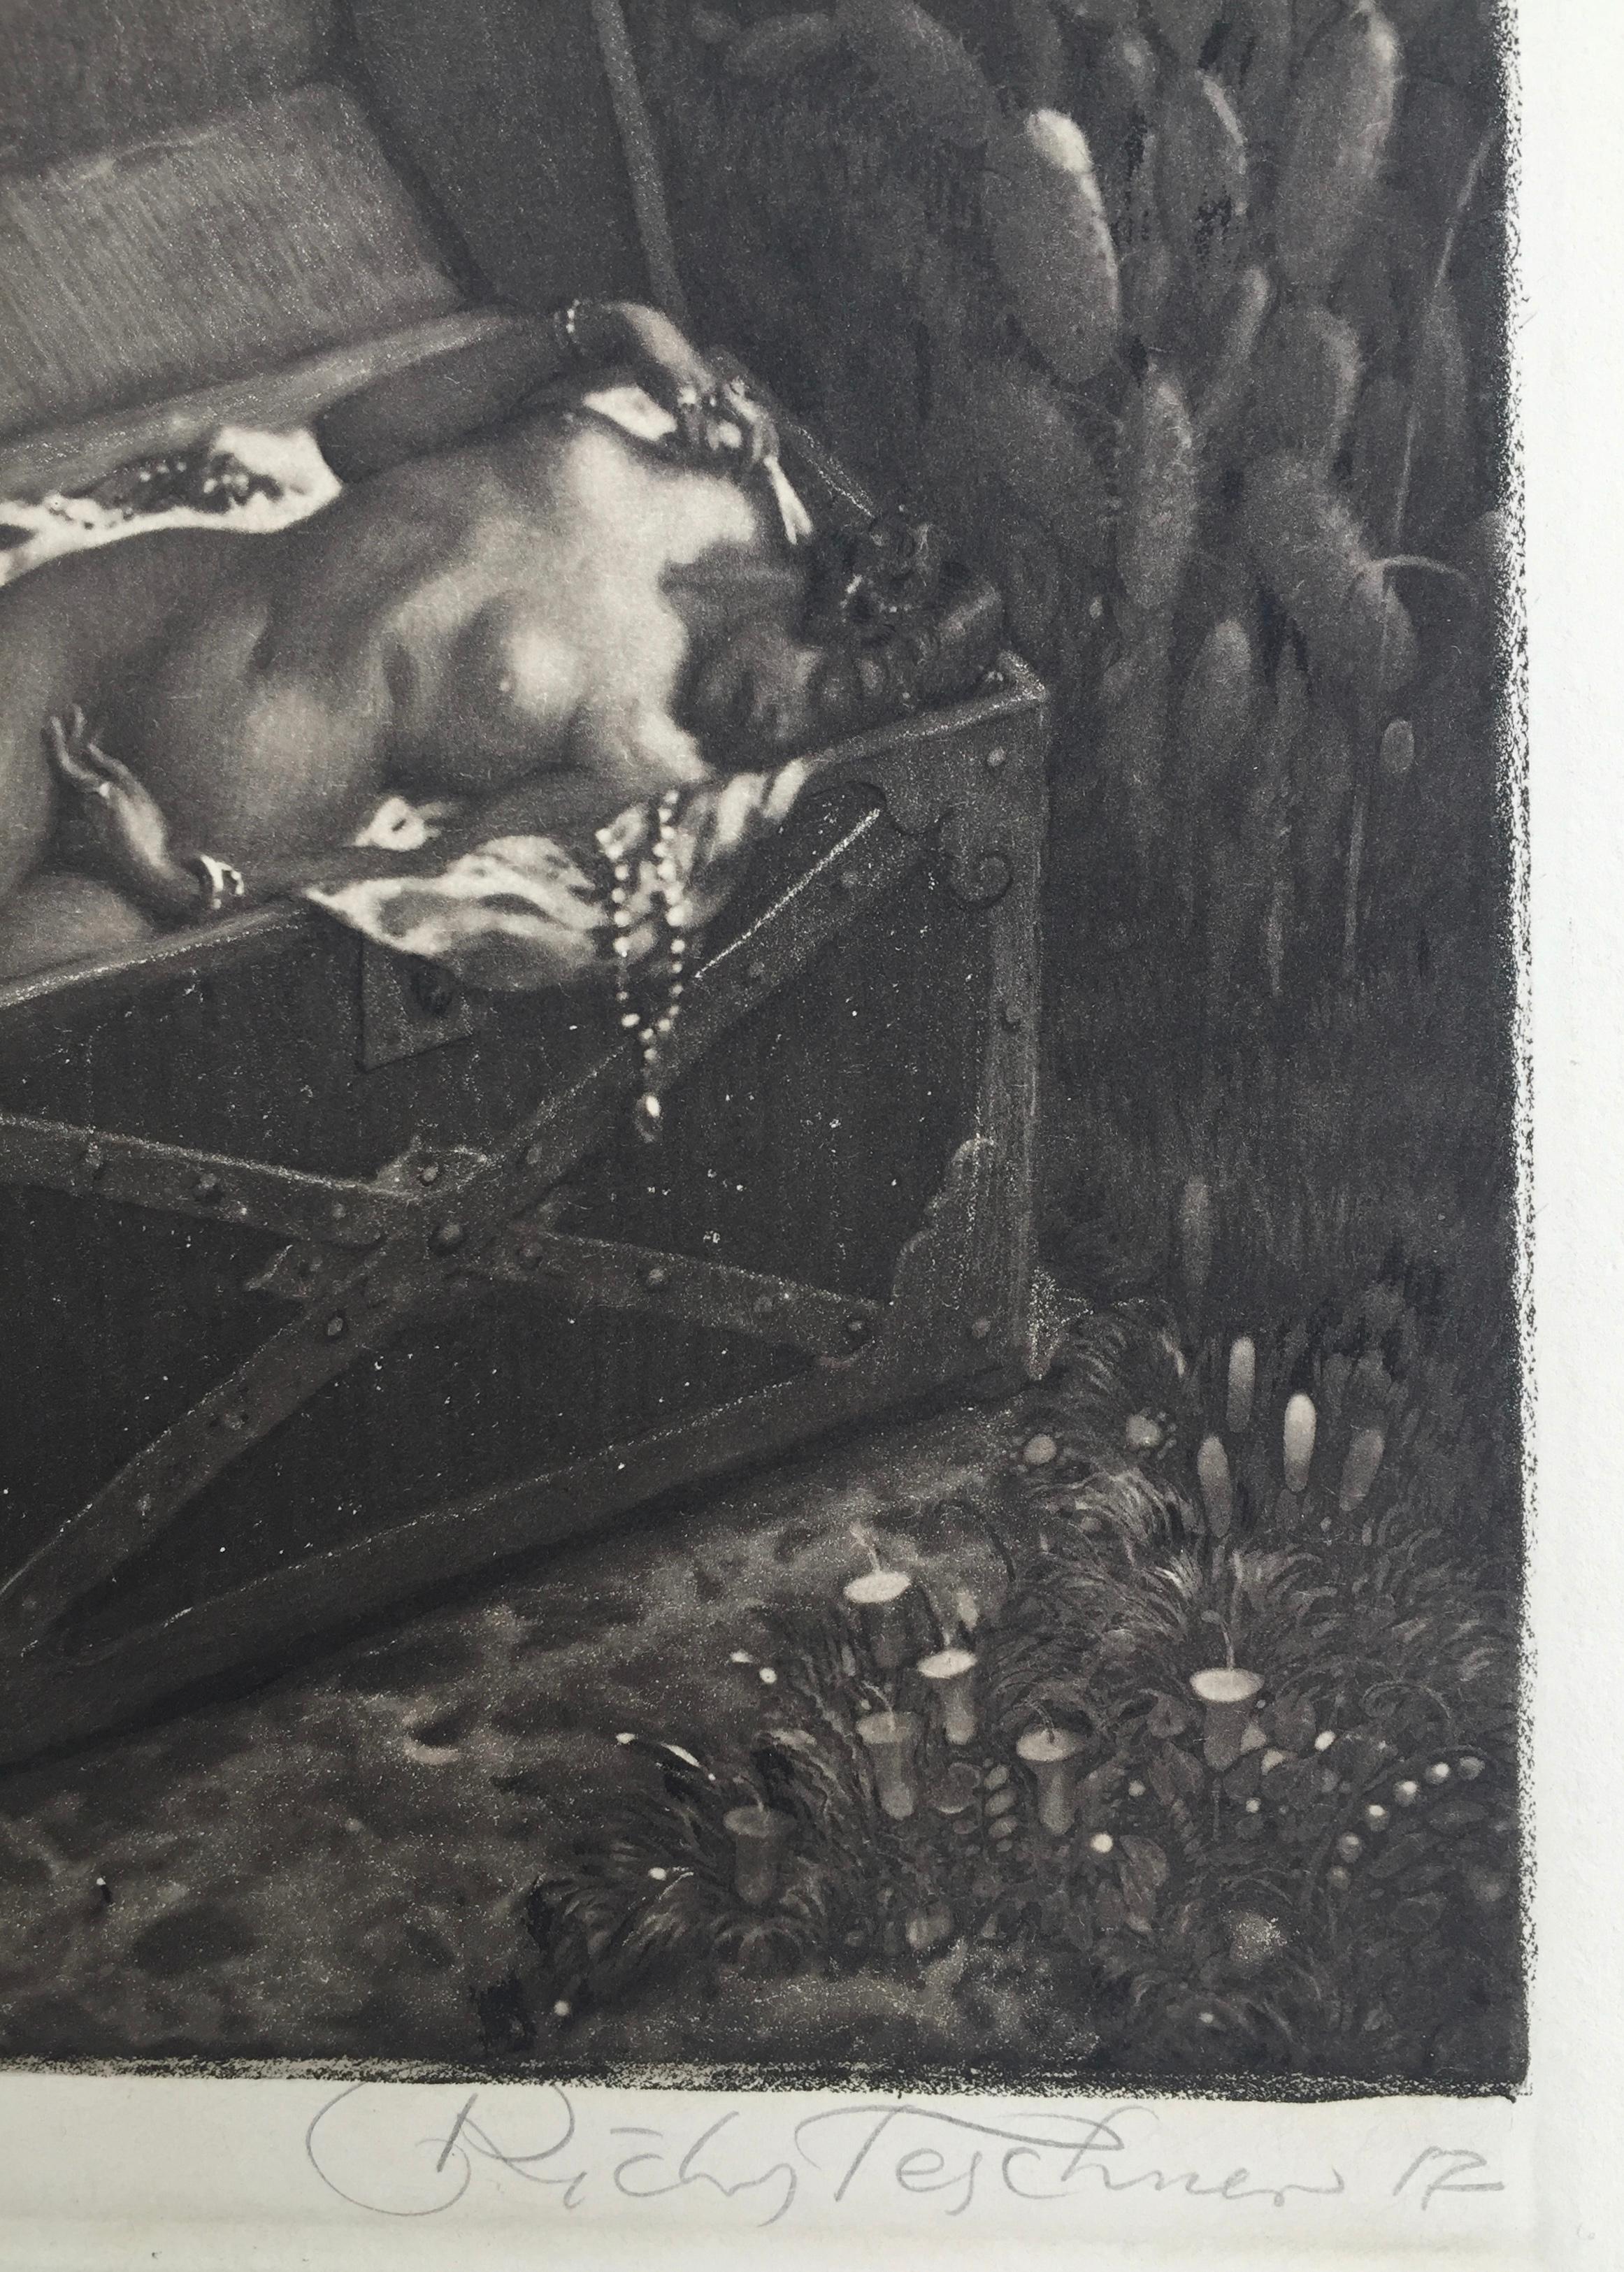 RICHARD TESCHNER (Prague 1879 – 1948)

From:  A Thousand and One Nights - 
SURREALIST WOMAN DEAD IN A TREASURE BOX, 1917 Aquatint, Proof no. 17.  Aquatint in brown. This is a rare signed proof impression. Signed and dated in pencil and in the plate.